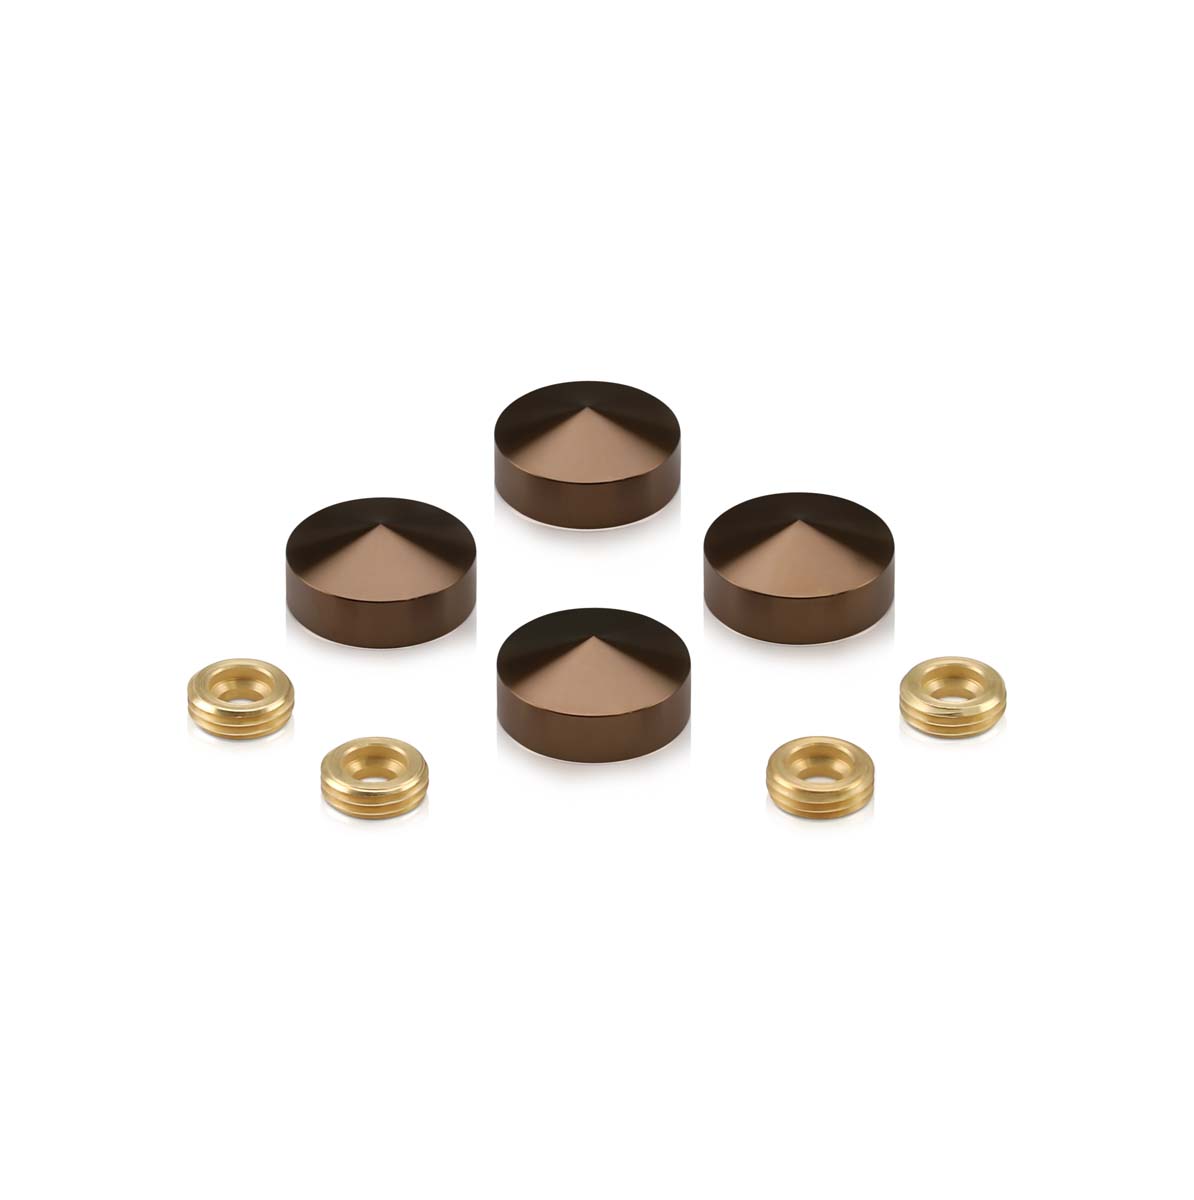 Set of 4 Conical Screw Cover, Diameter: 11/16'' (Less 3/4''), Aluminum Bronze Anodized Finish (Indoor or Outdoor Use)